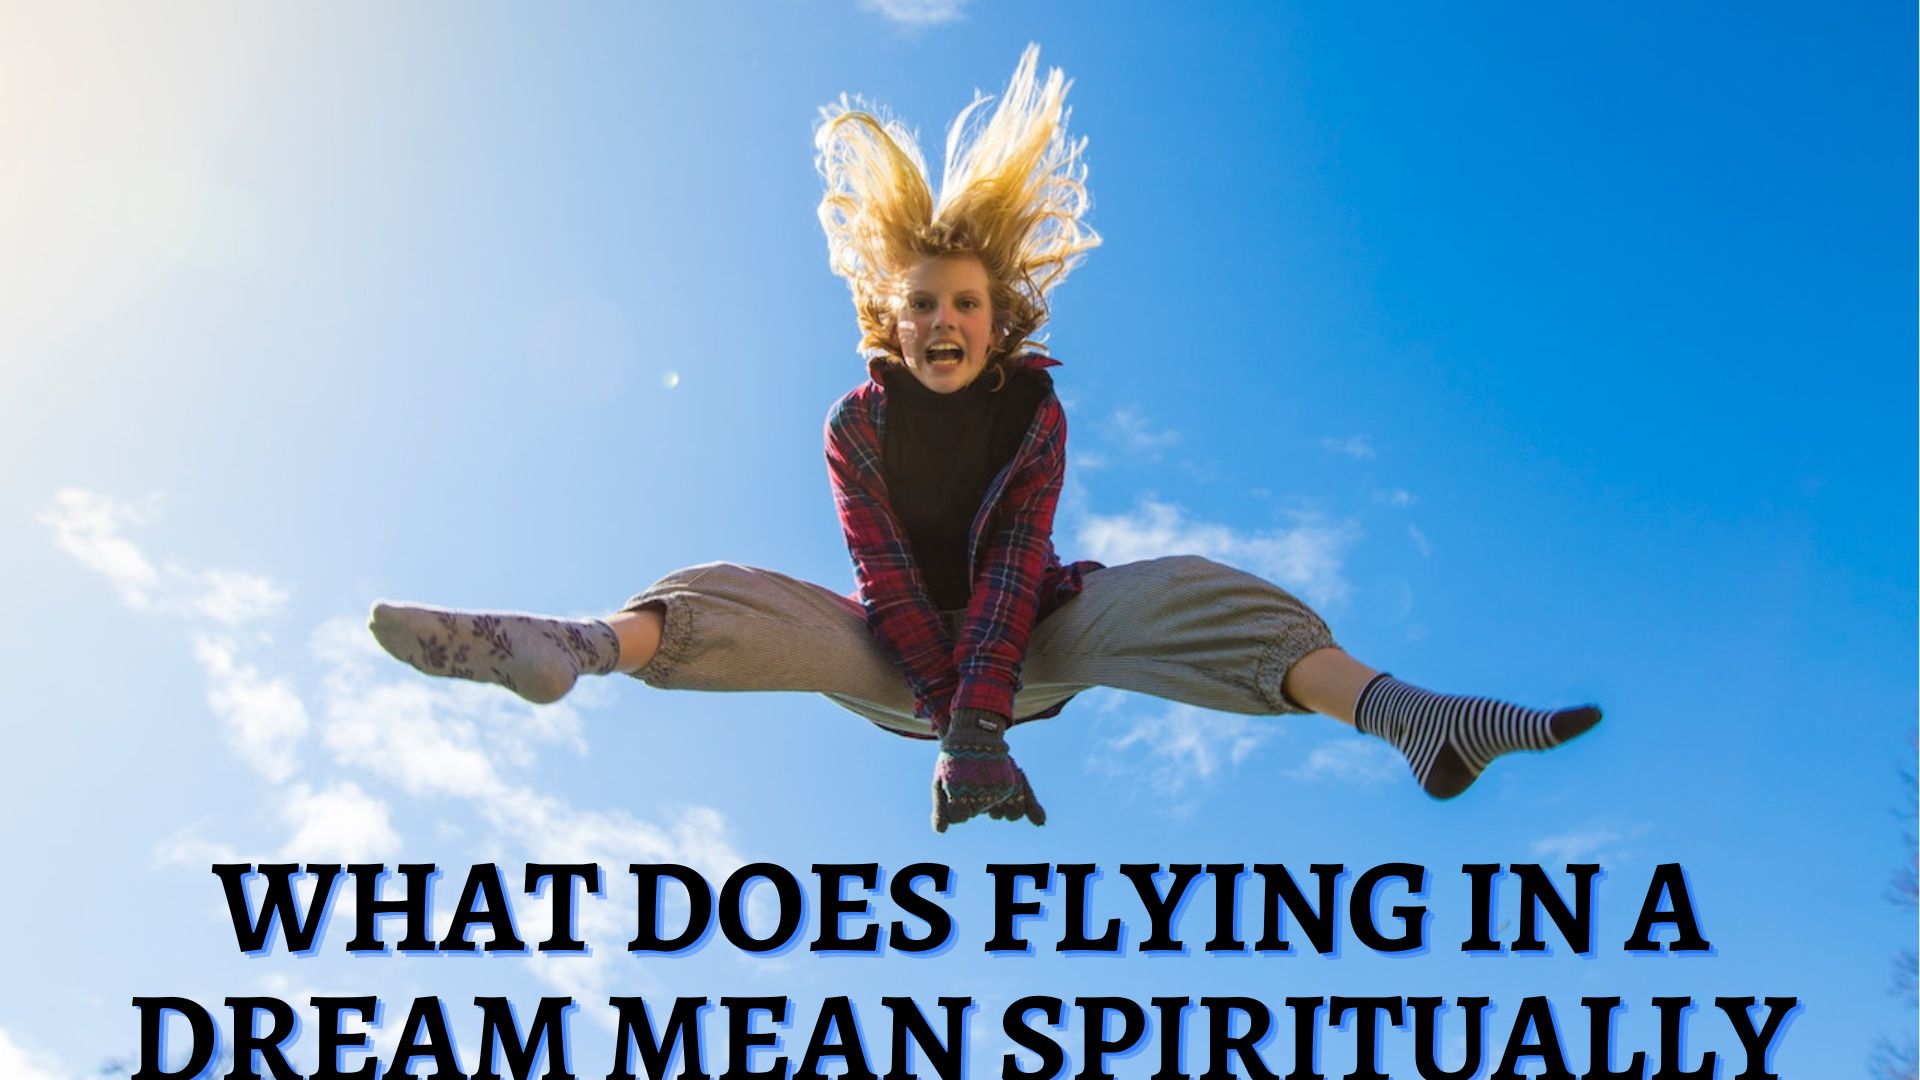 What Does Flying In A Dream Mean Spiritually?